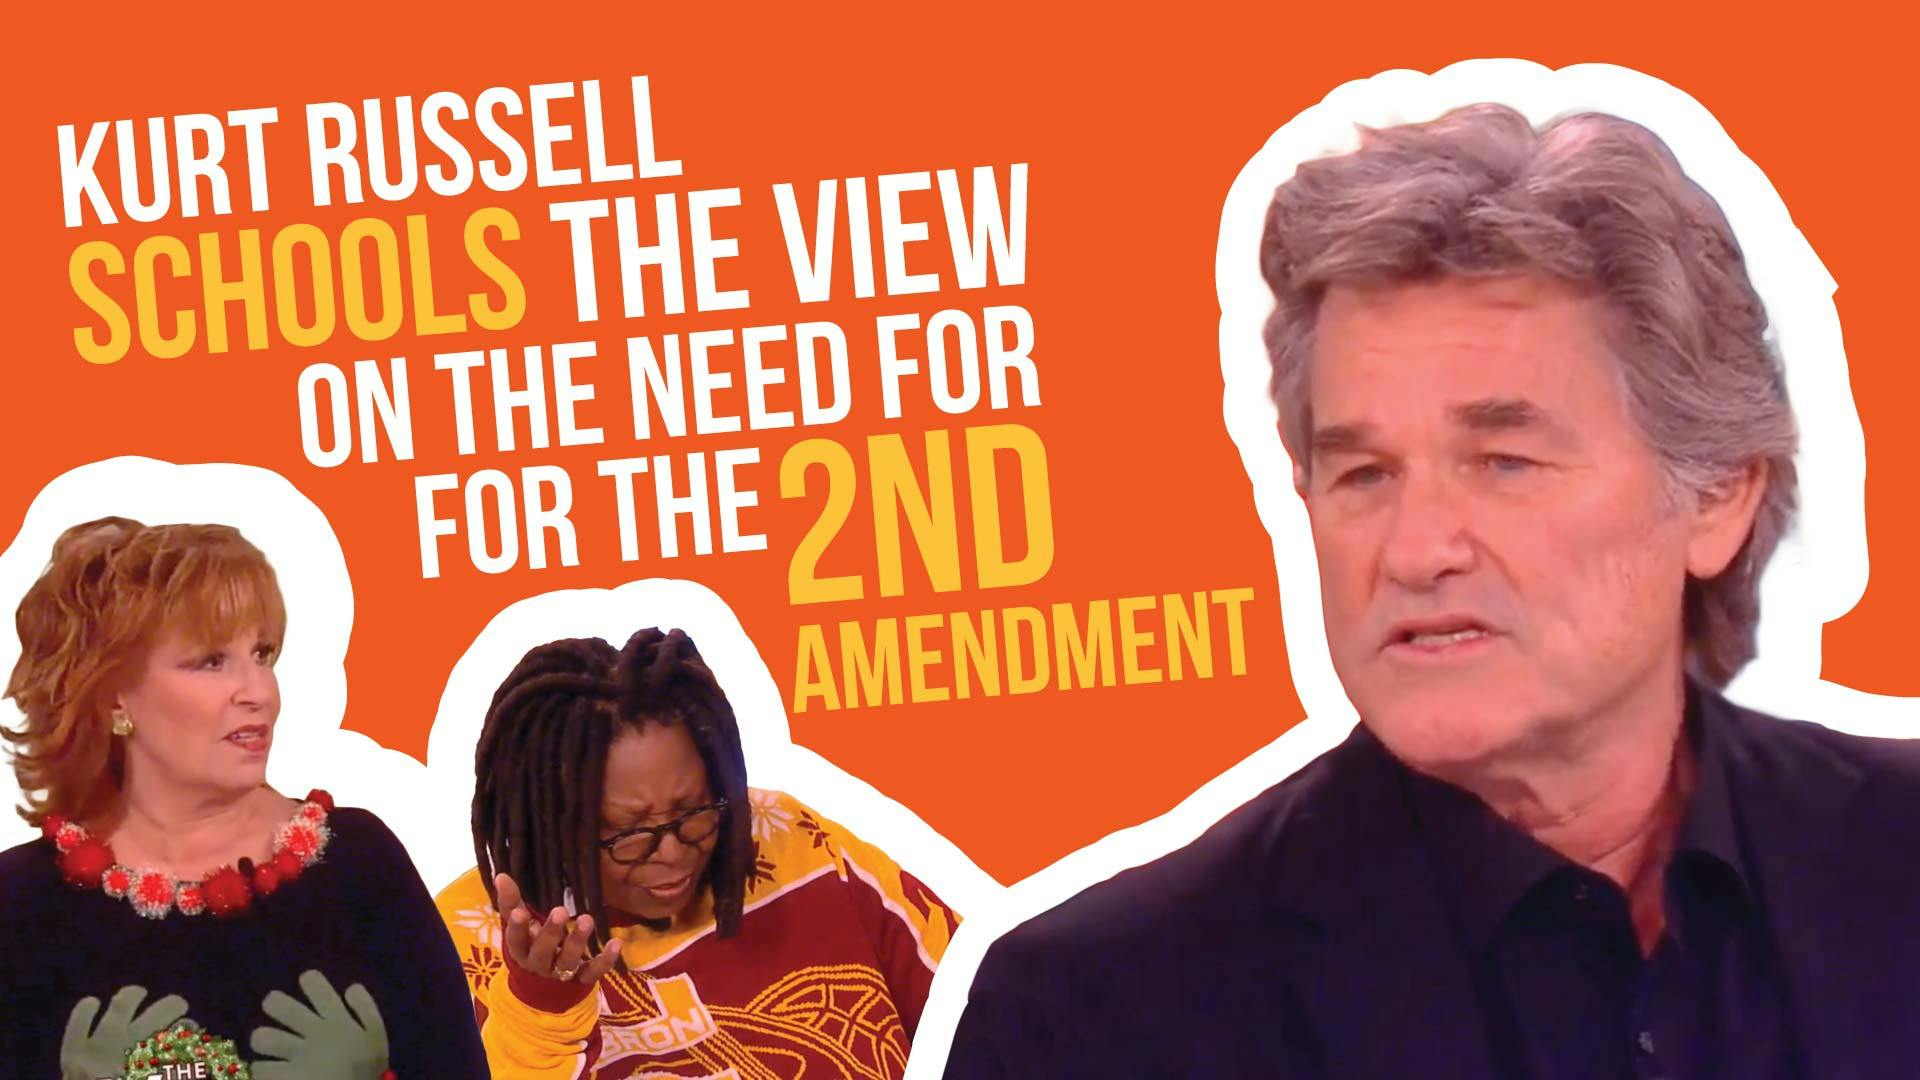 Kurt Russell Schools the View on the Need for the Second Amendment